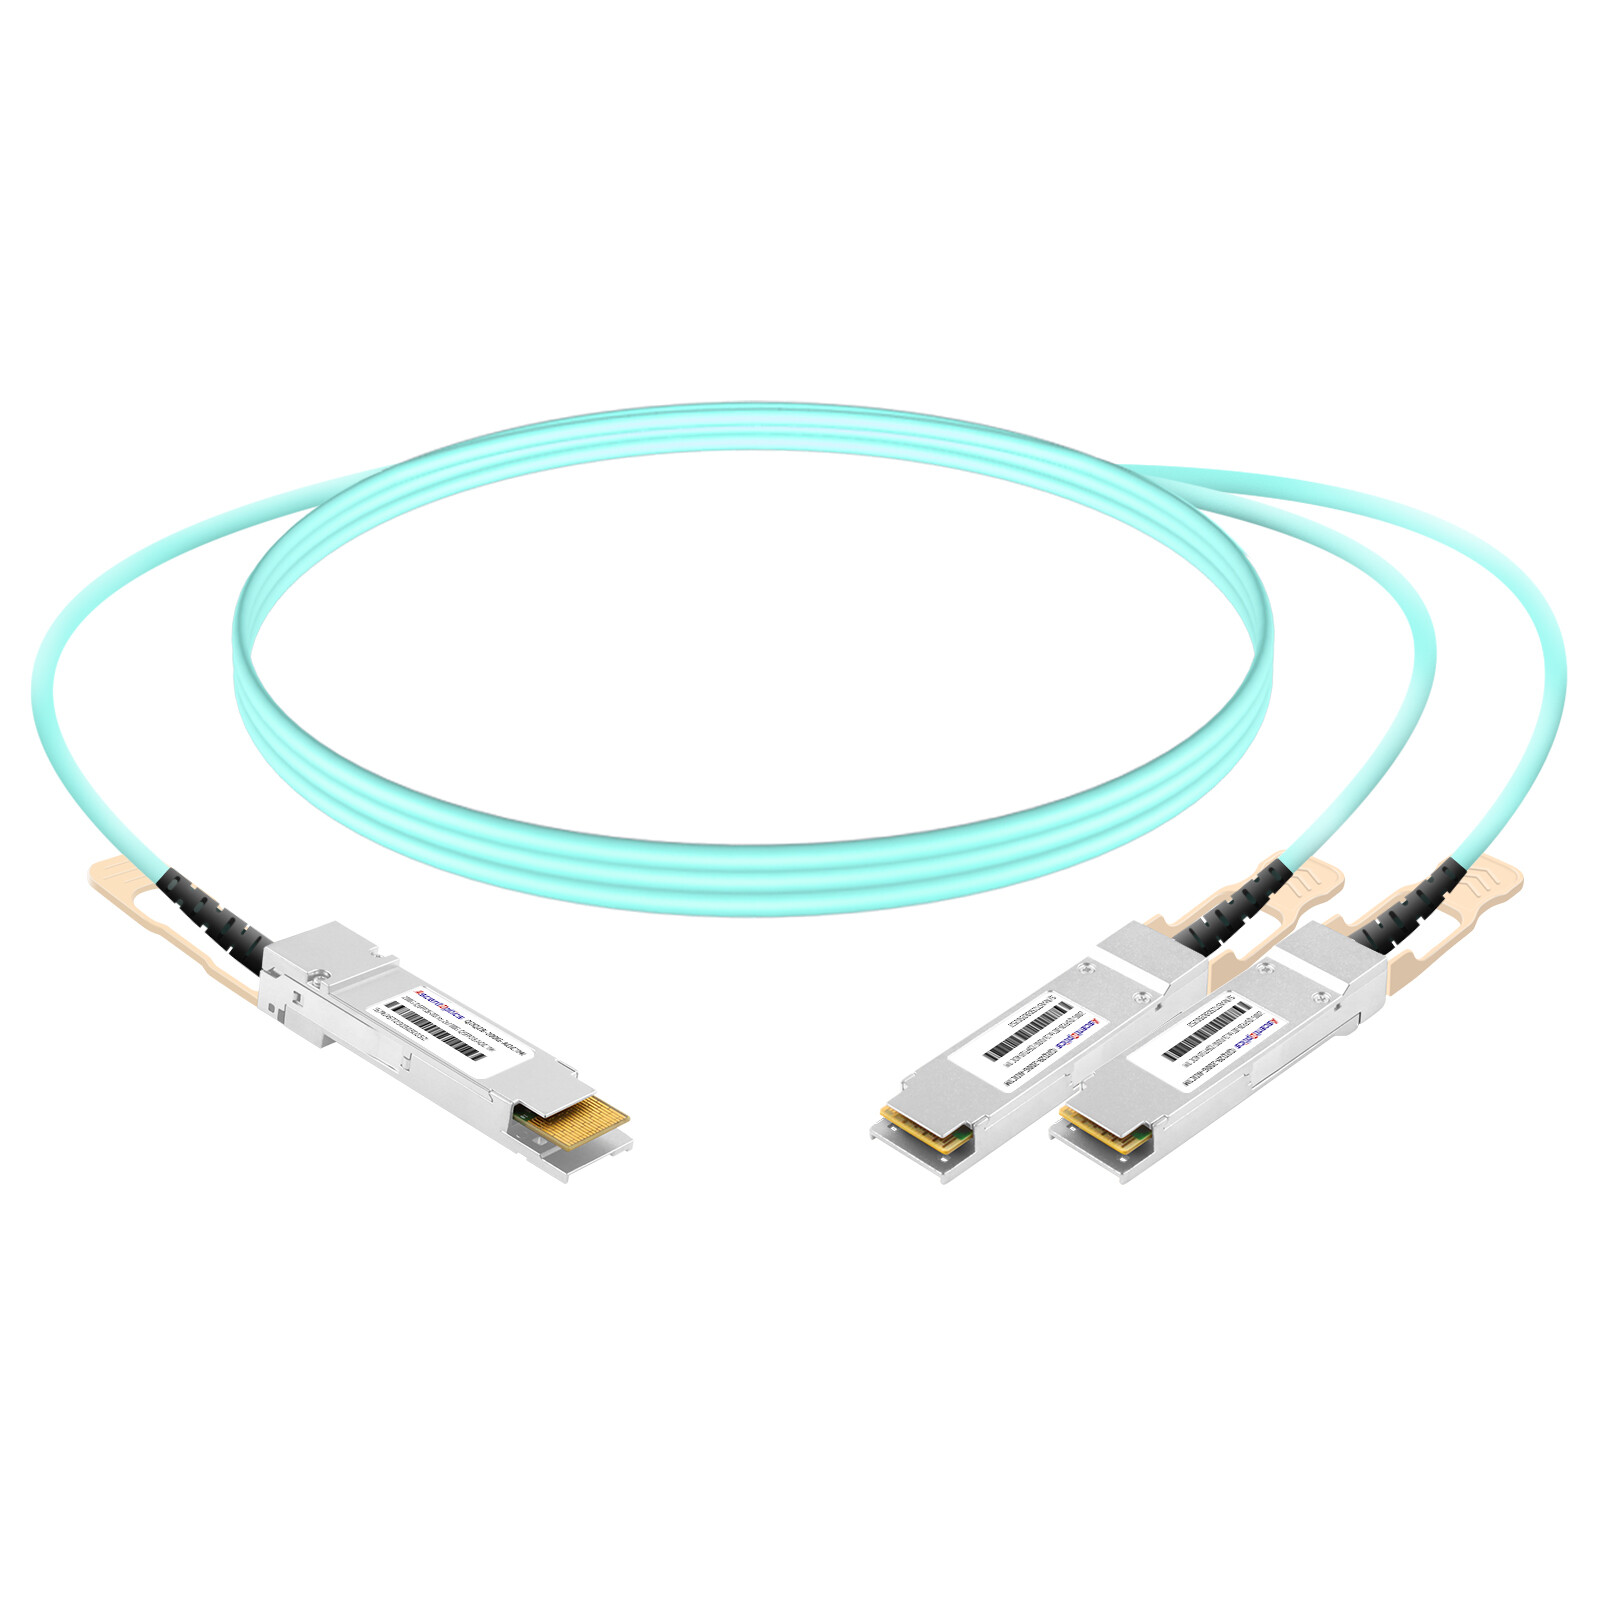 200G QSFP28-DD to 2x 100G QSFP28 Breakout AOC Cable,1 Meter